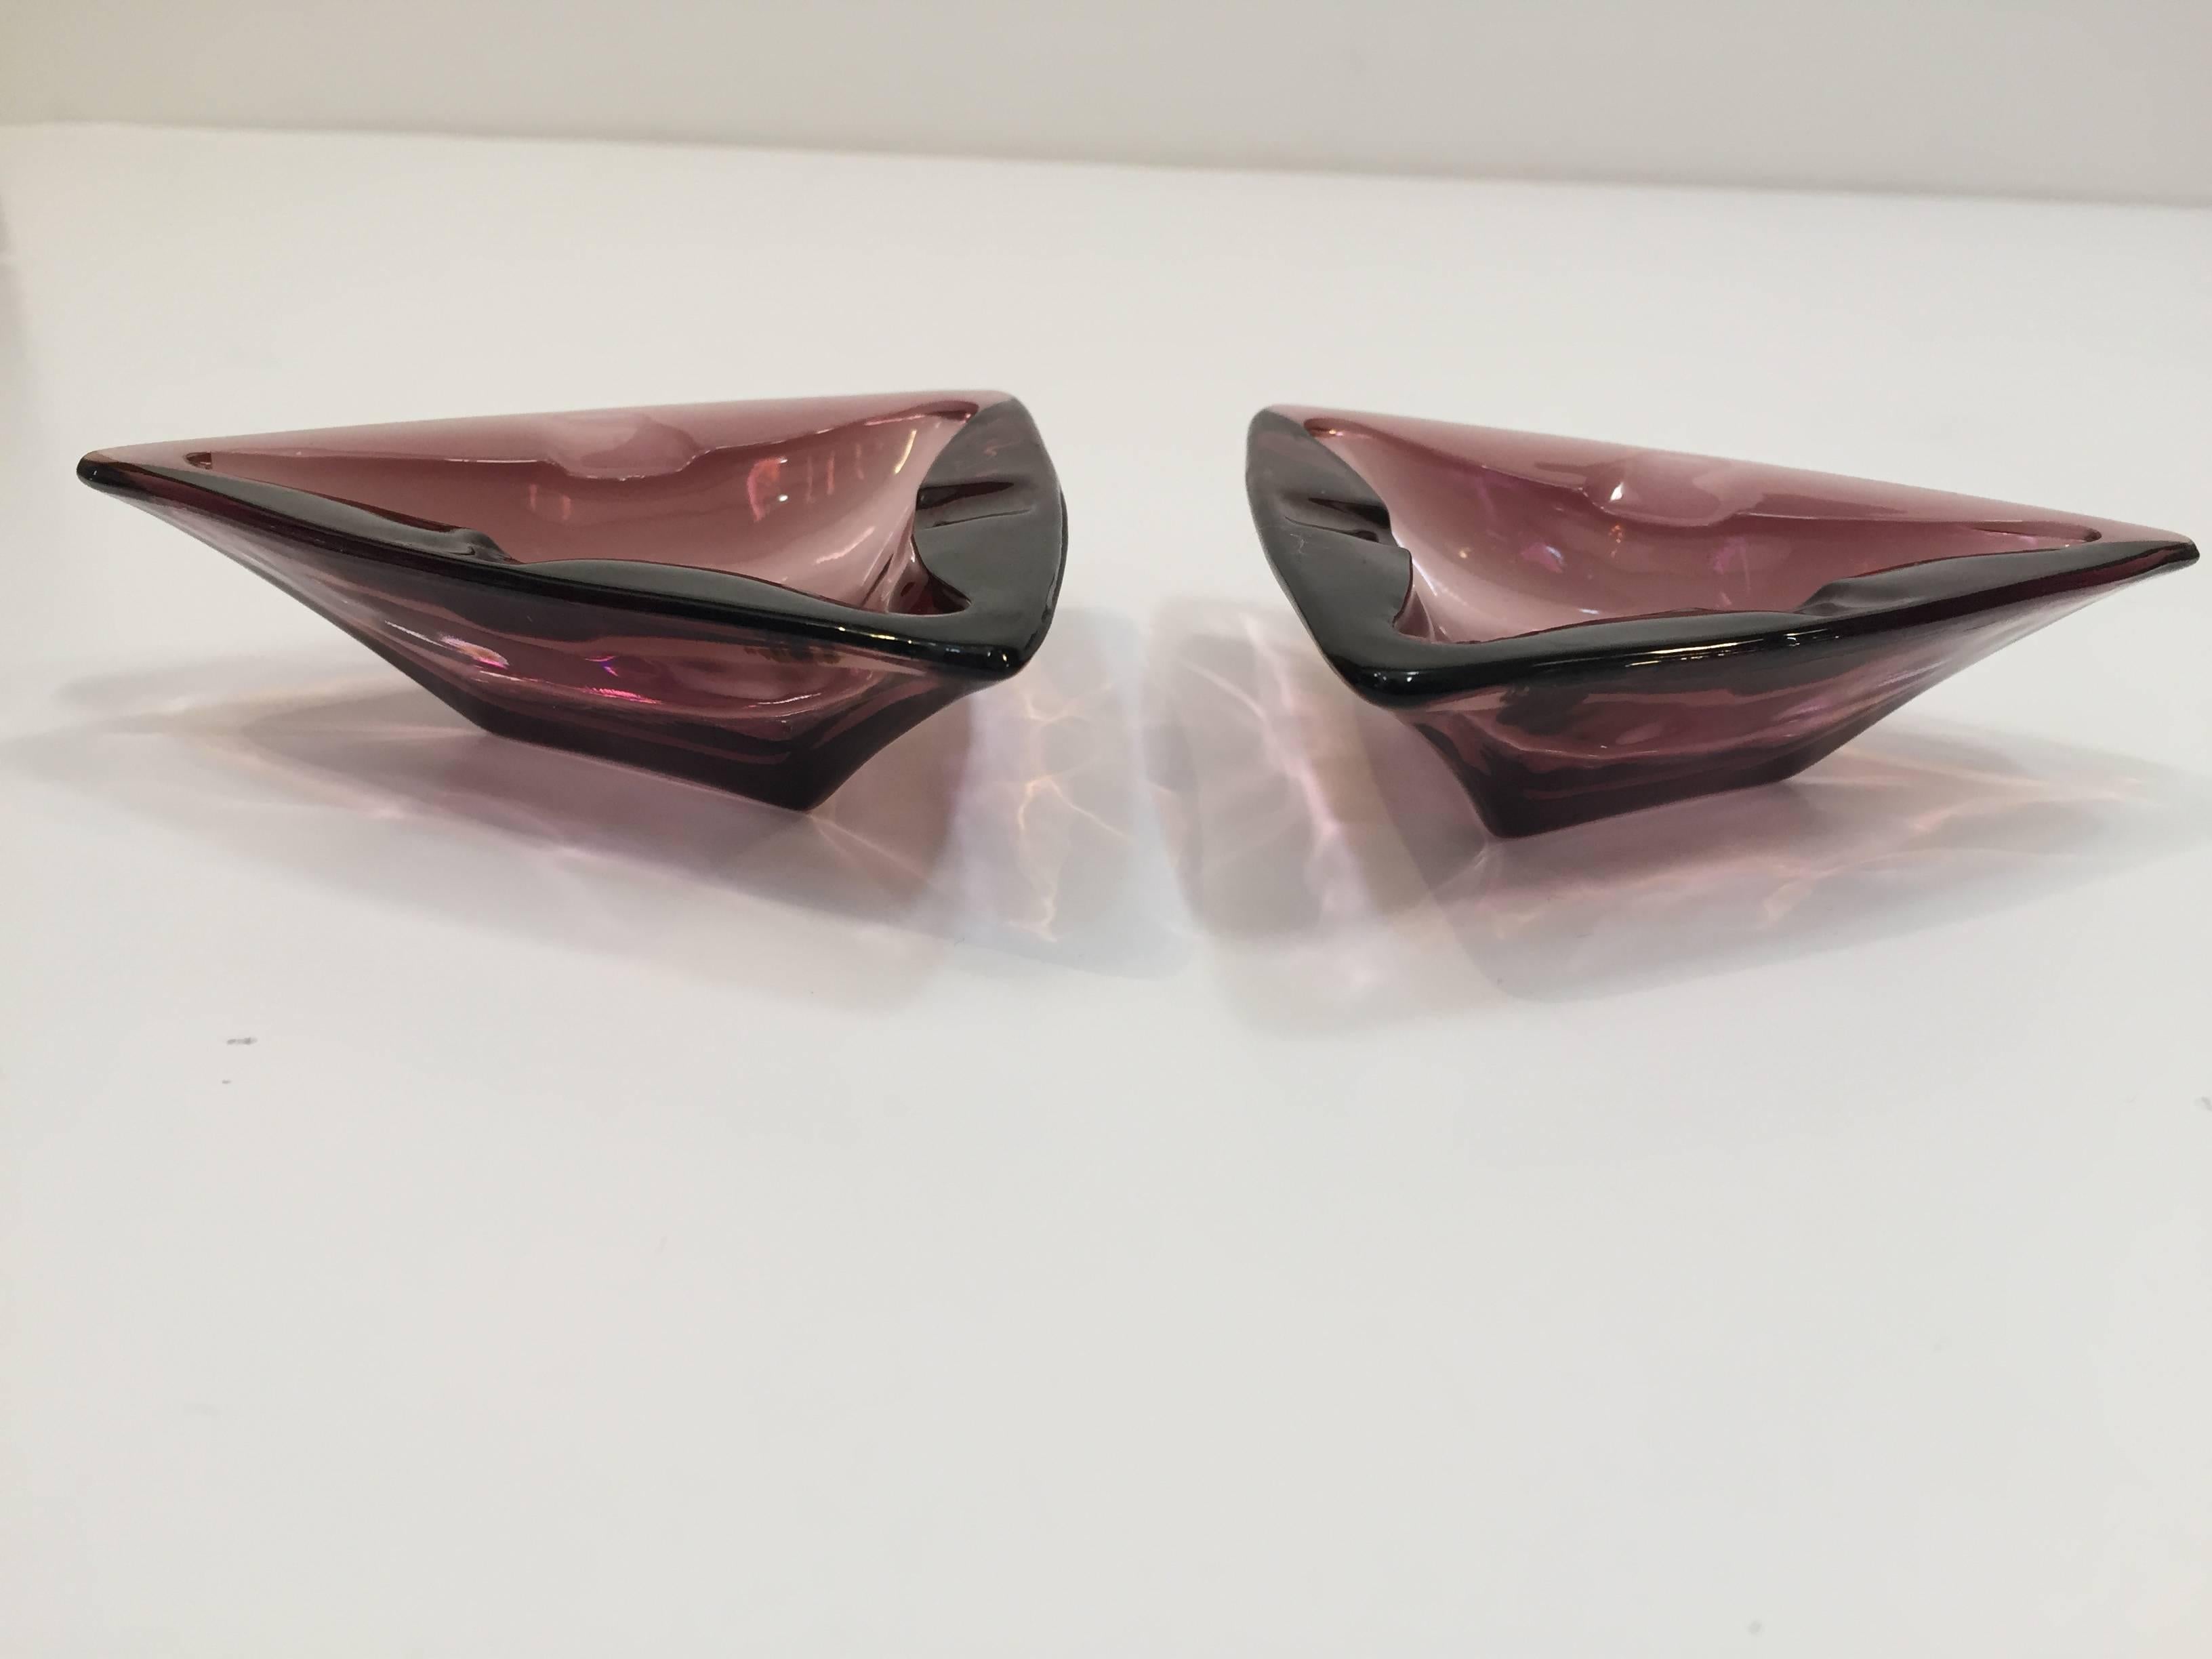 Moroccan amethyst set of two ashtrays from the 1950s.
Small individual ashtrays
Vintage hazel atlas Moroccan amethyst ashtrays glass in a triangle shape.
Set is in excellent condition, great purple amethyst glass.
A great addition to any retro or